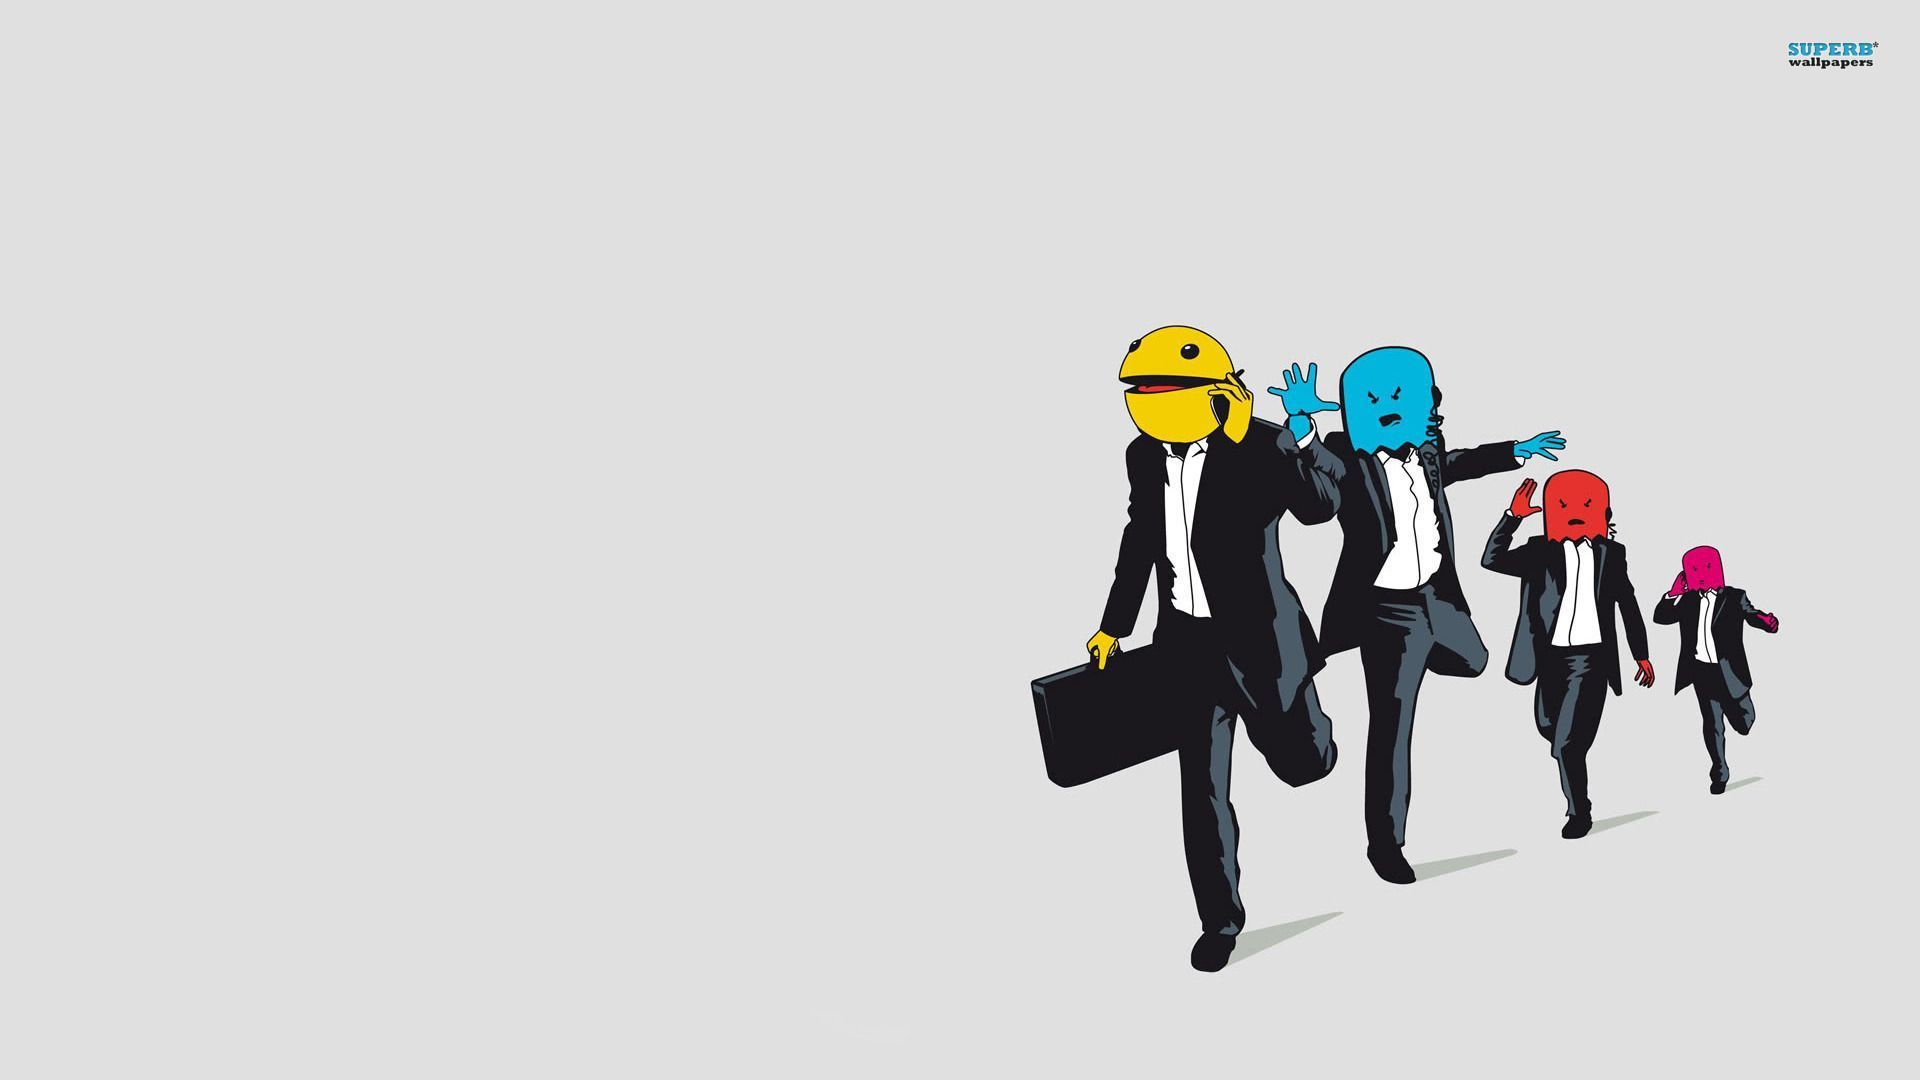 Business Pac Man chased by ghosts wallpaper - Game wallpapers -